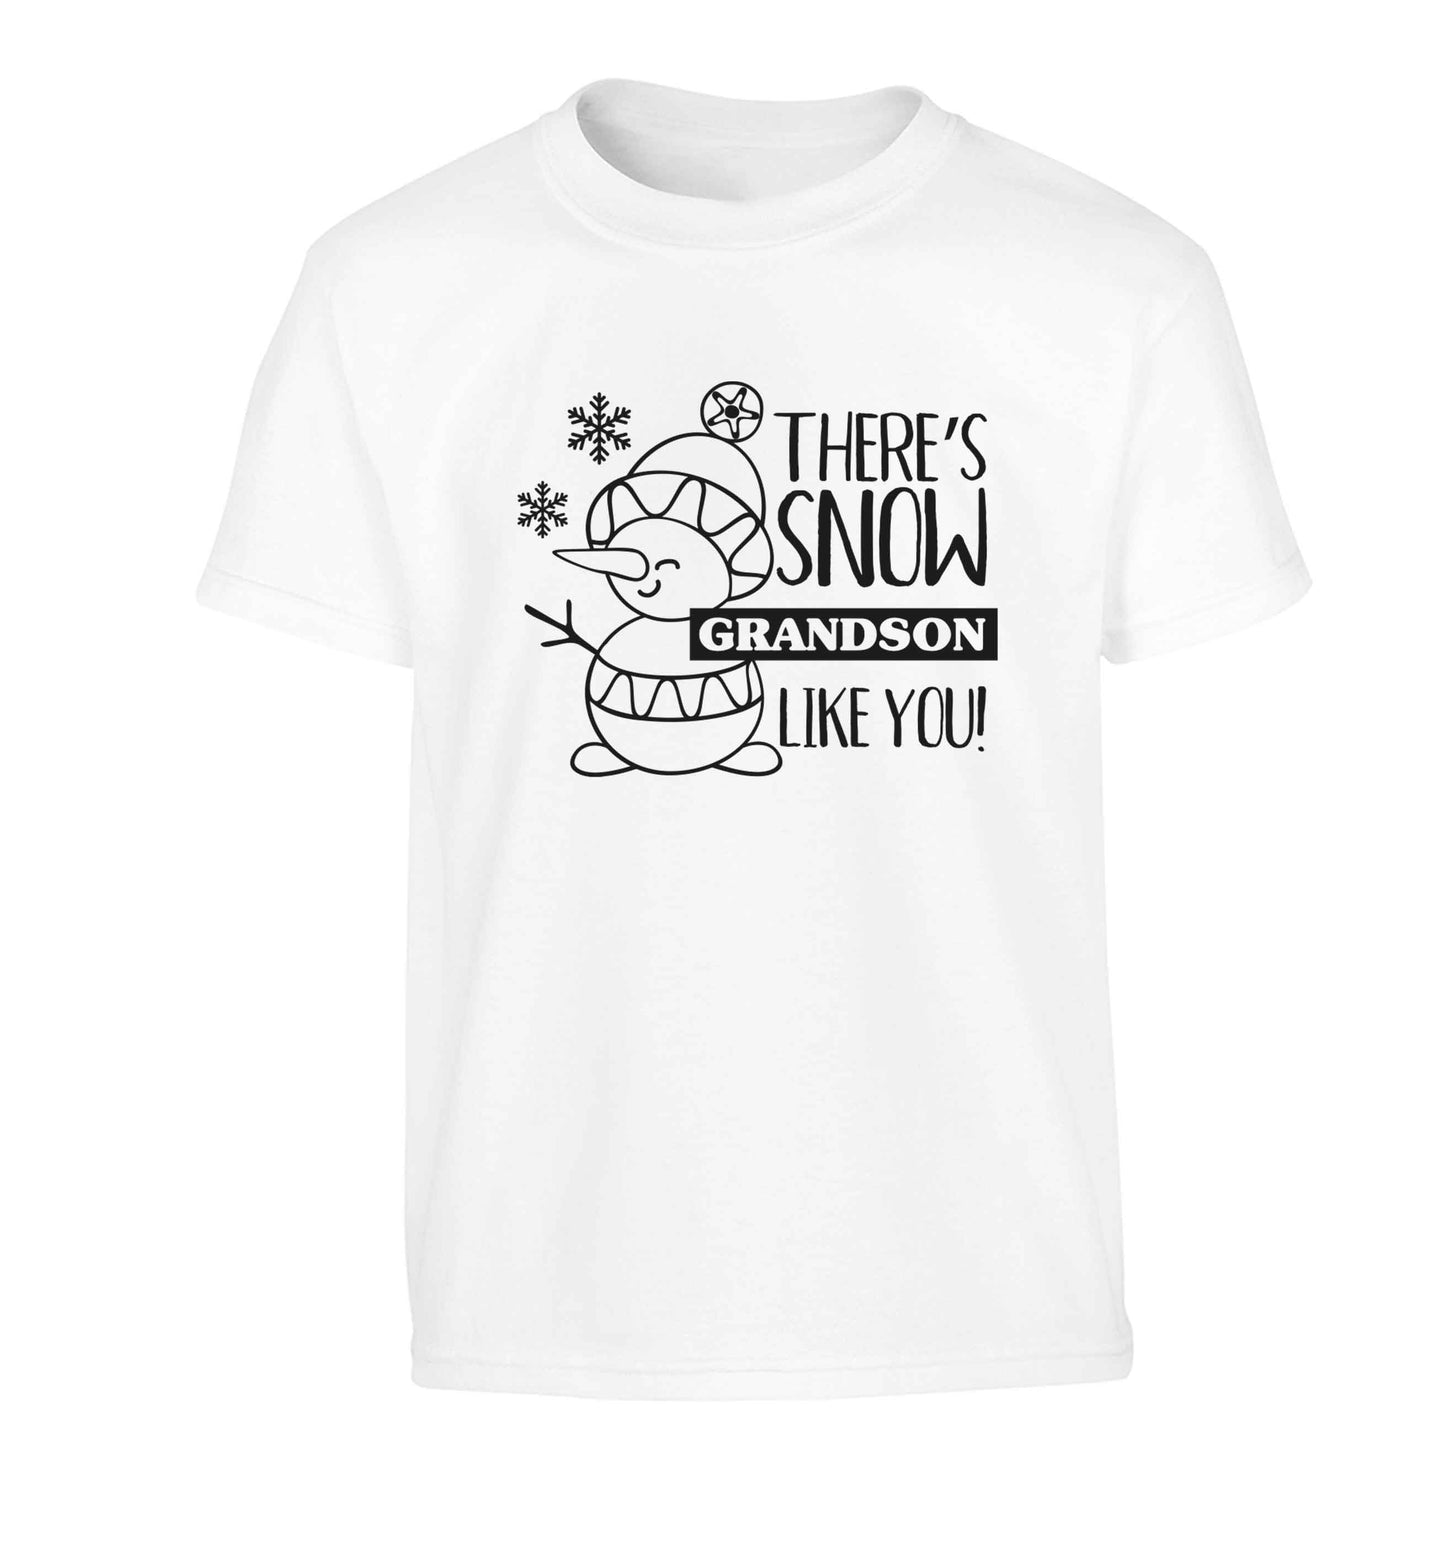 There's snow grandson like you Children's white Tshirt 12-13 Years